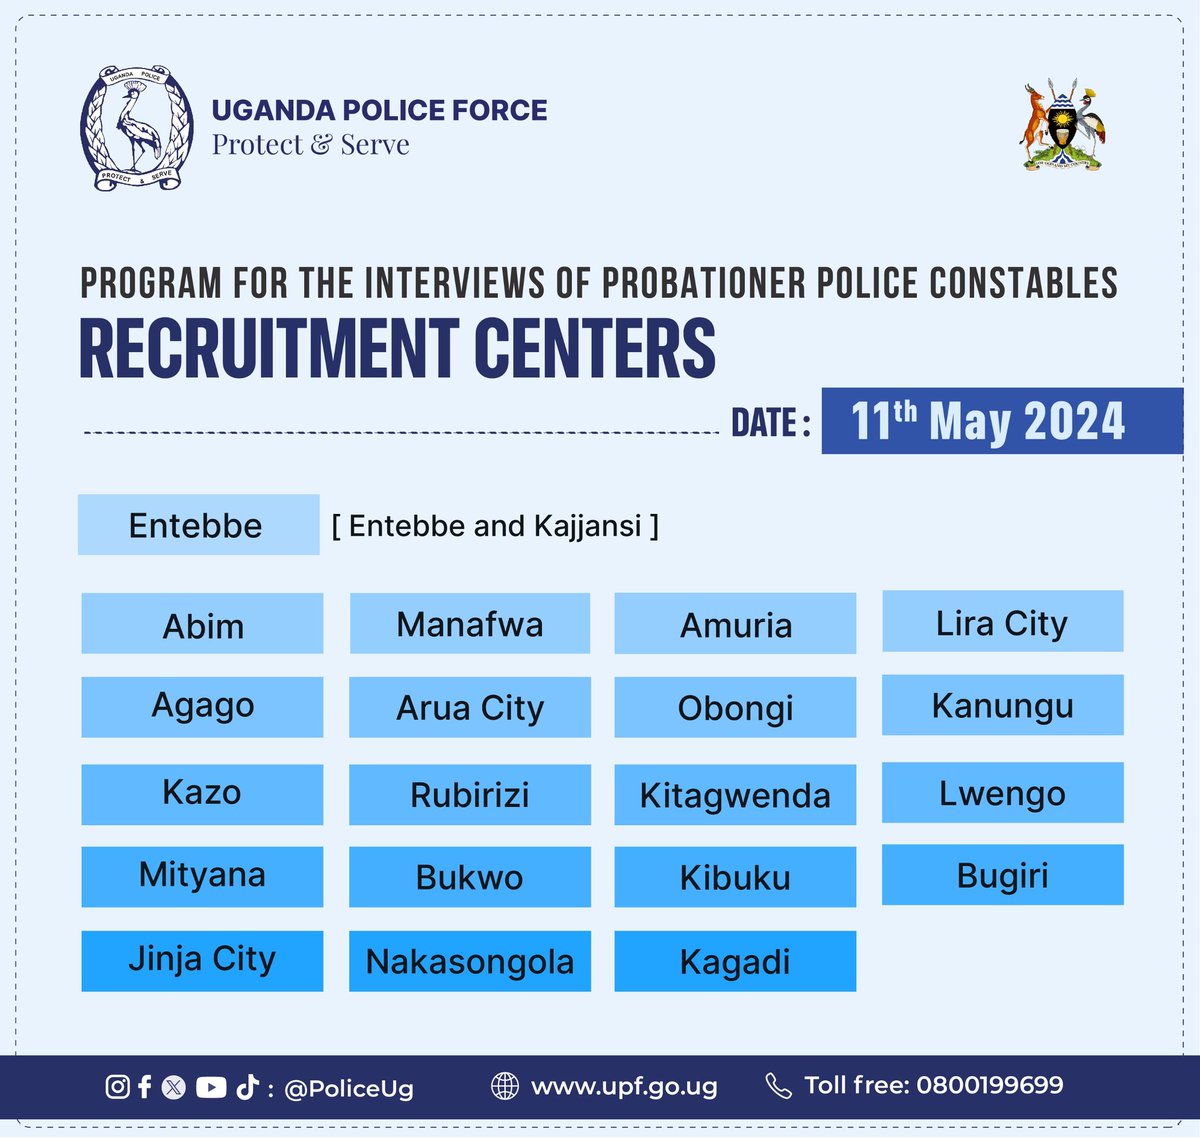 Recruitment program for tomorrow 11th May 2024.